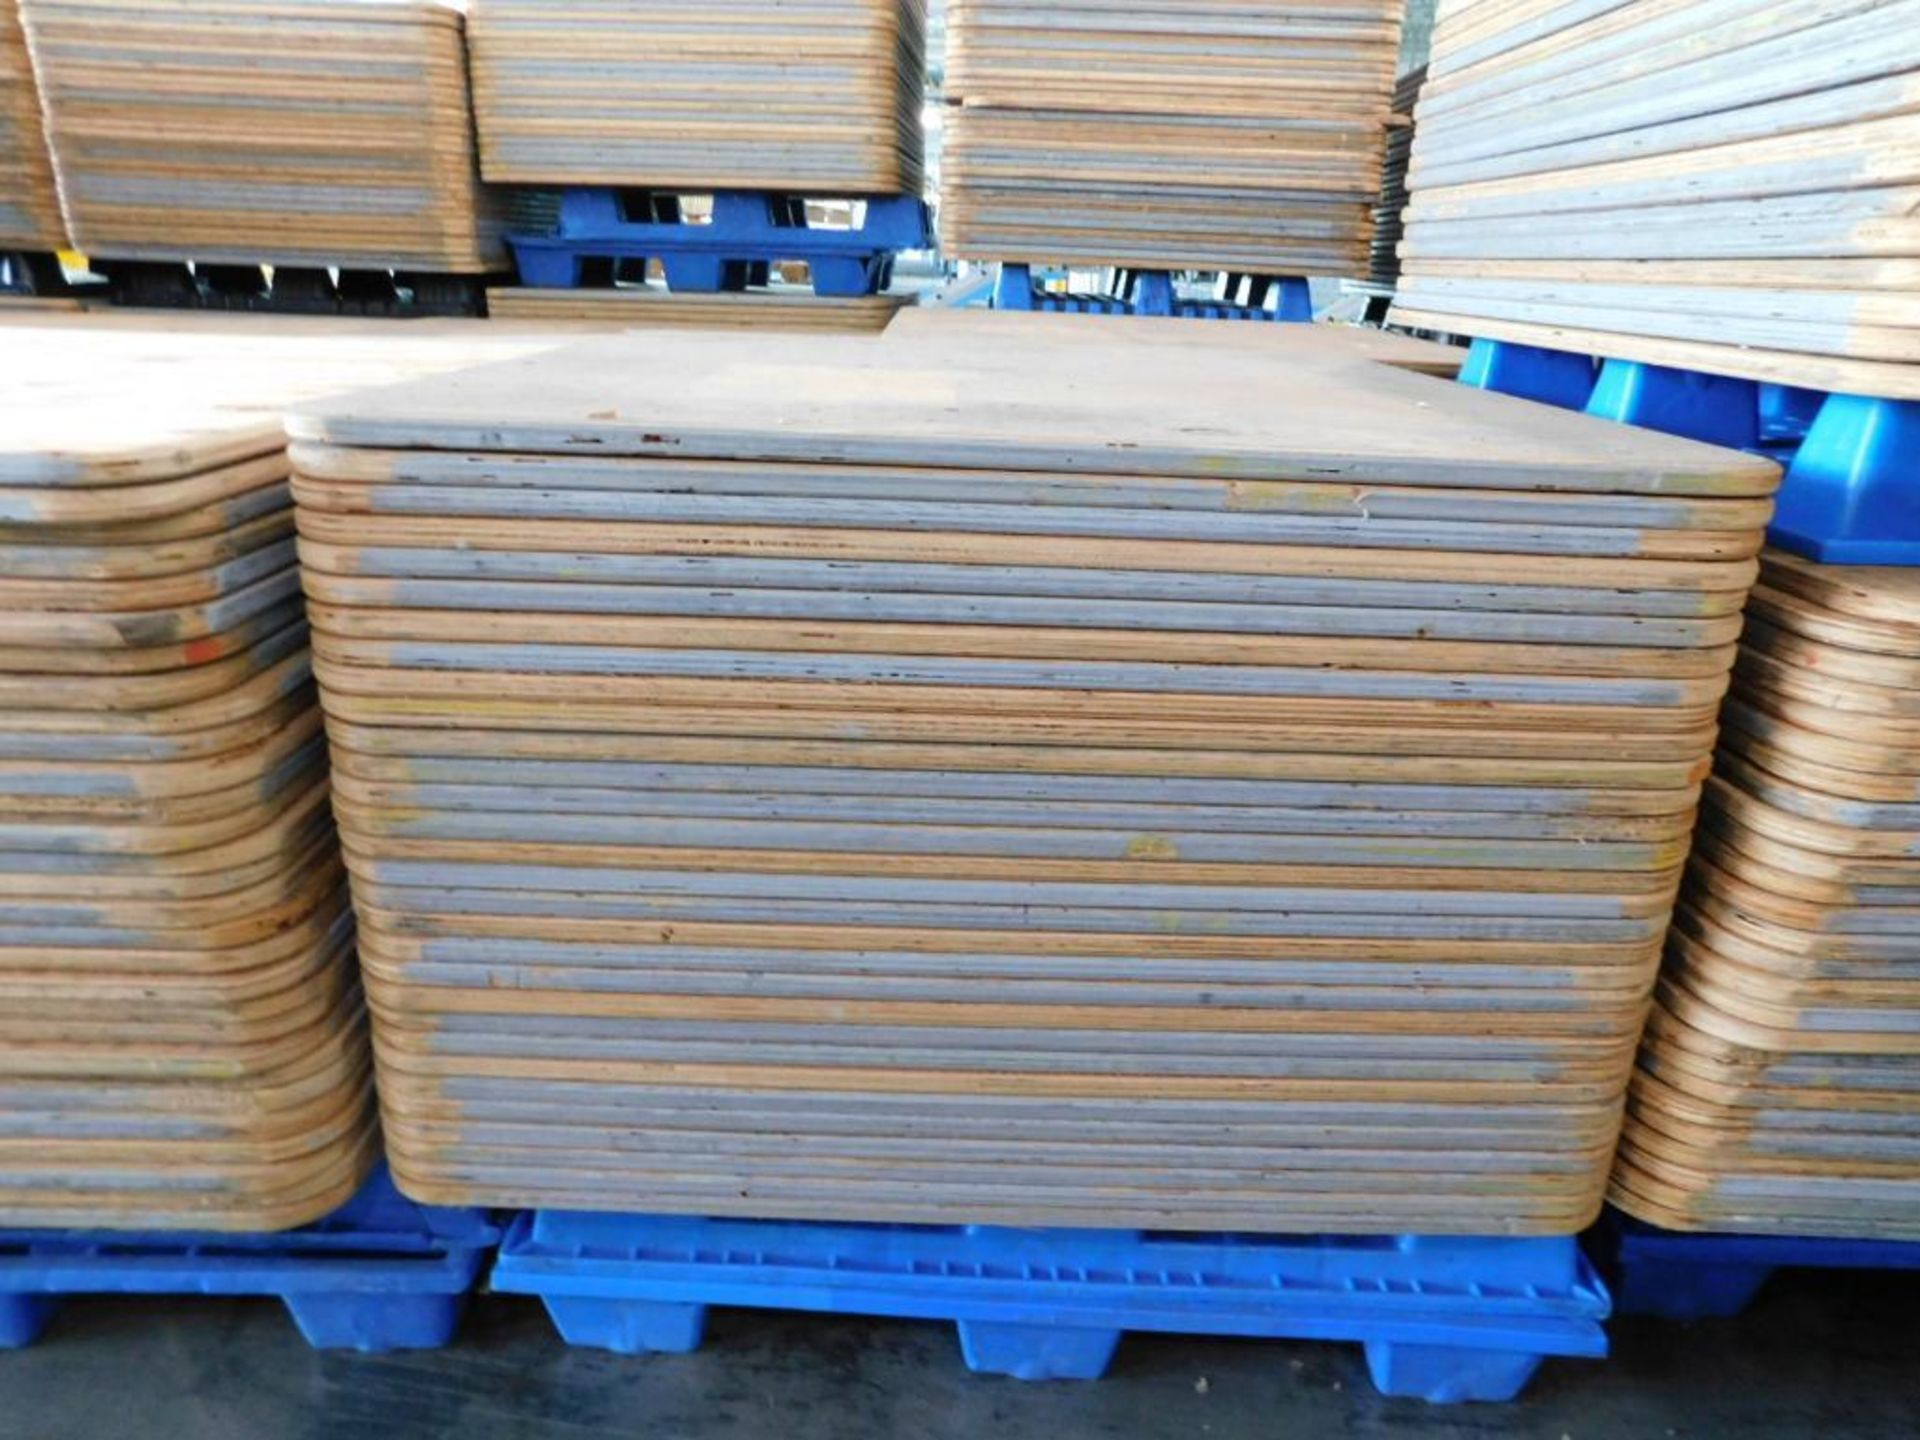 LOT: Large Quantity of 50" x 50" Wood Paper Roll Pallets on (7) Plastic Pallets (LOCATION: IN MAIL R - Image 4 of 6